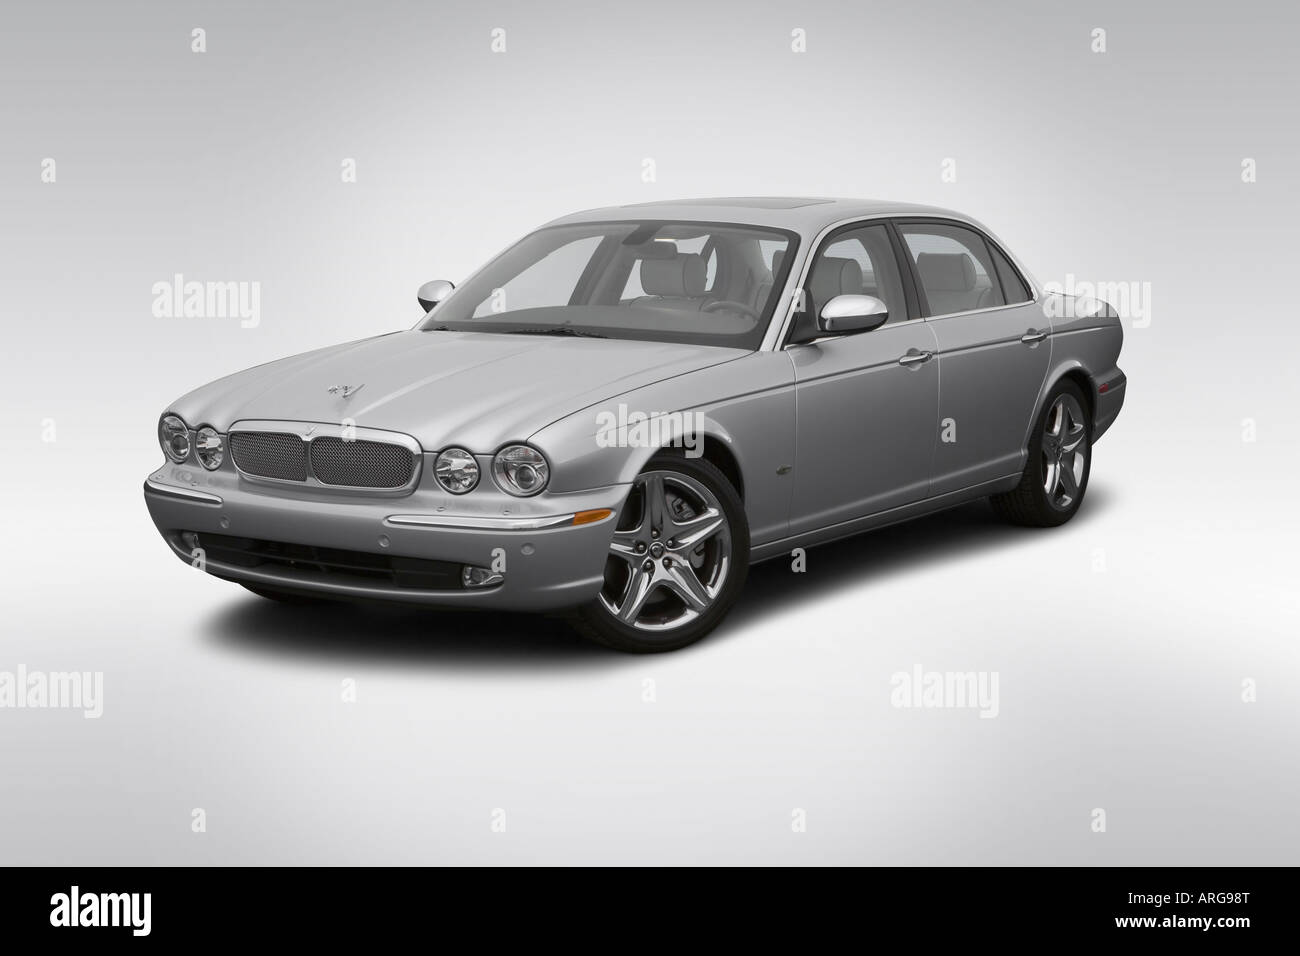 2007 Jaguar XJ Super V8 in Silver - Front angle view Stock Photo - Alamy